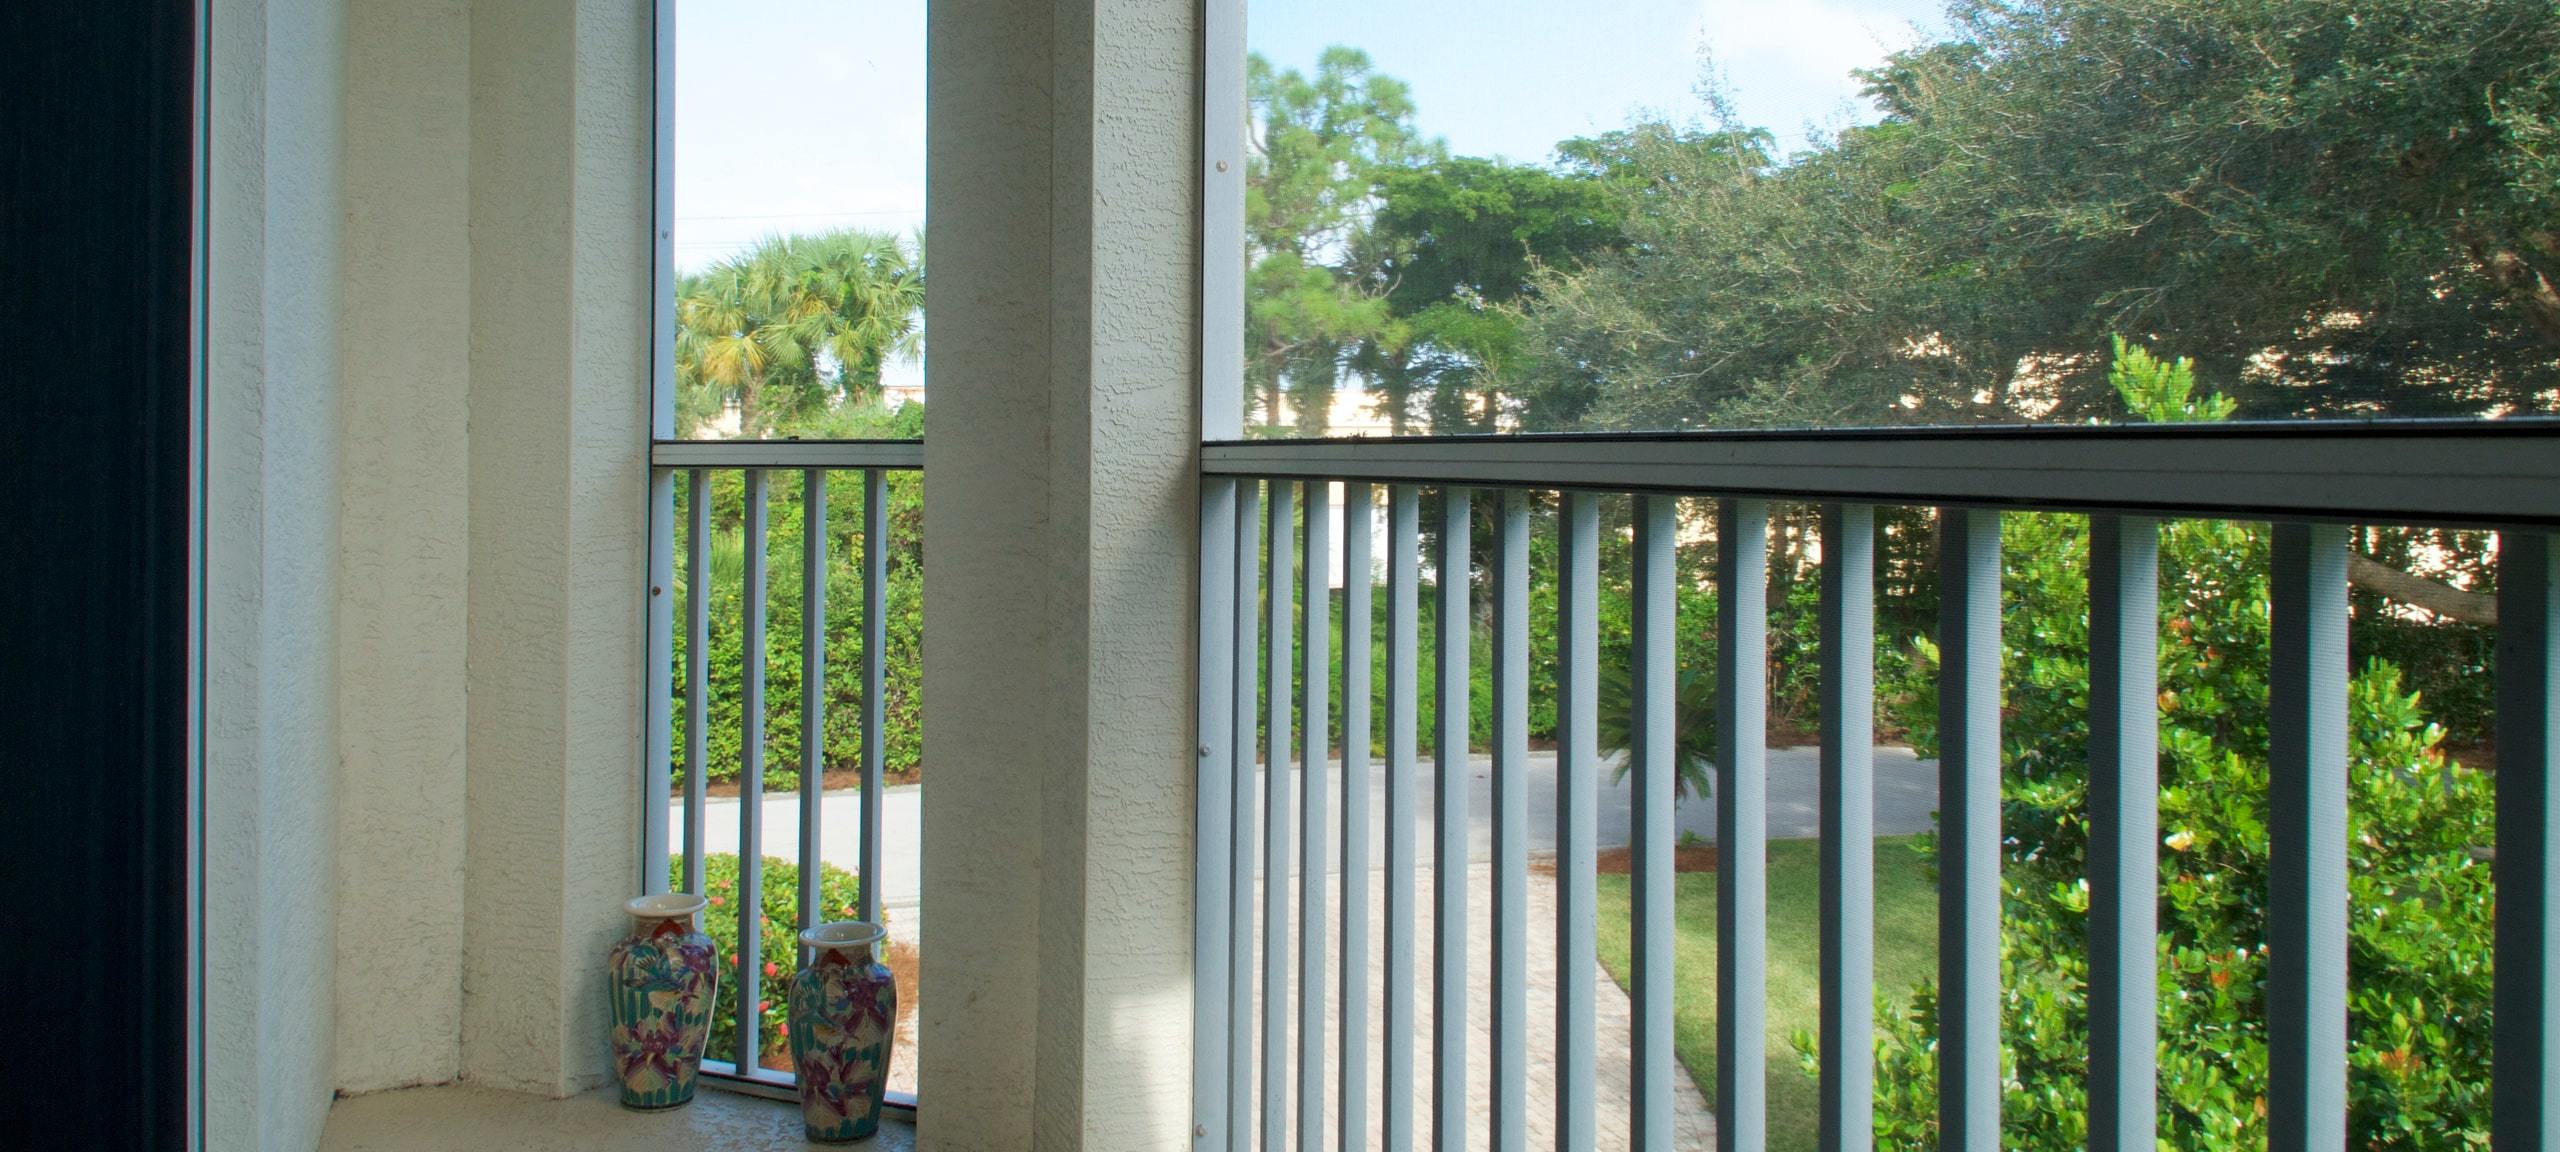 View from Florida condo balcony, typical of Reunion